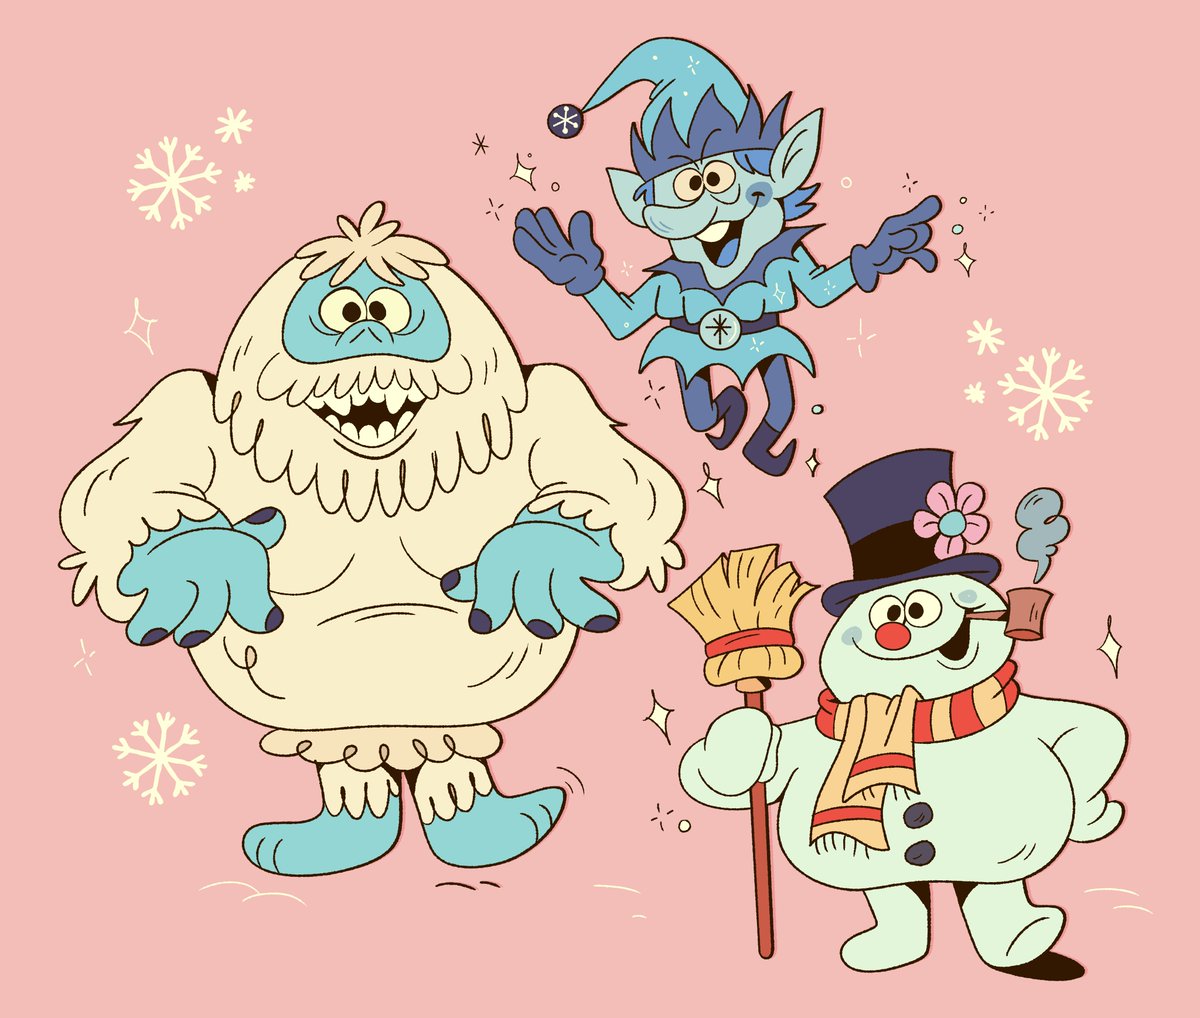 Some cold christmas boys for all this cold weather. #RankinBass #Frosty #JackFrost #abominablesnowman